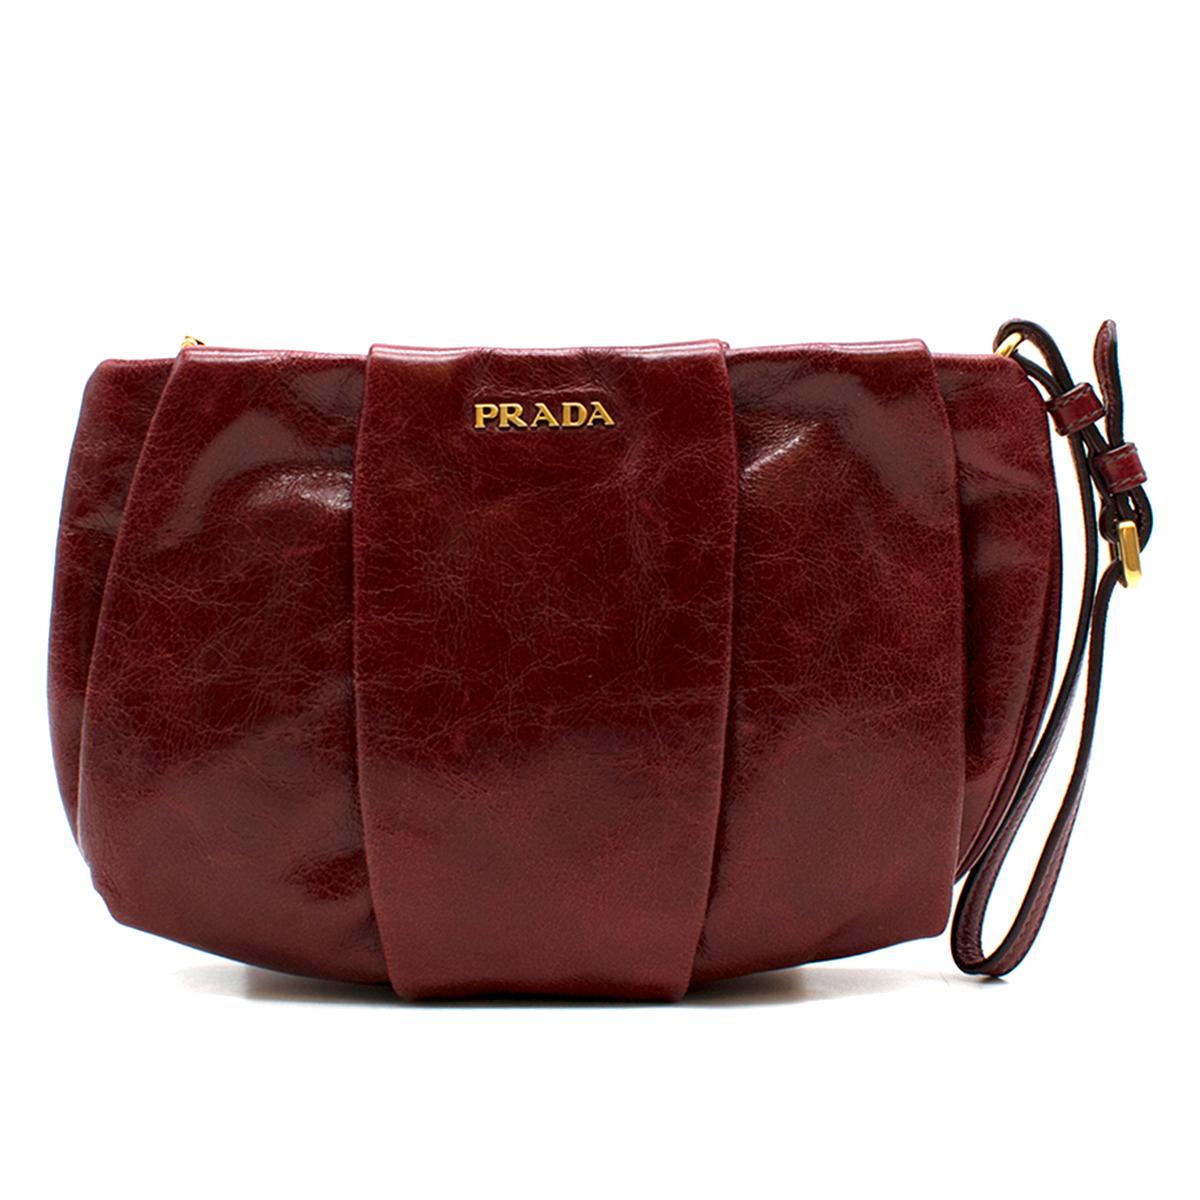 Prada burgundy leather clutch

- Burgundy, creased calf leather 
- Front and back pleated feature 
- Gold-tone metal front plaque 
- Adjustable wristlet strap
- Top zip closure, logo engraved zip tab
- Logo jacquard lining
- Comes with a box.